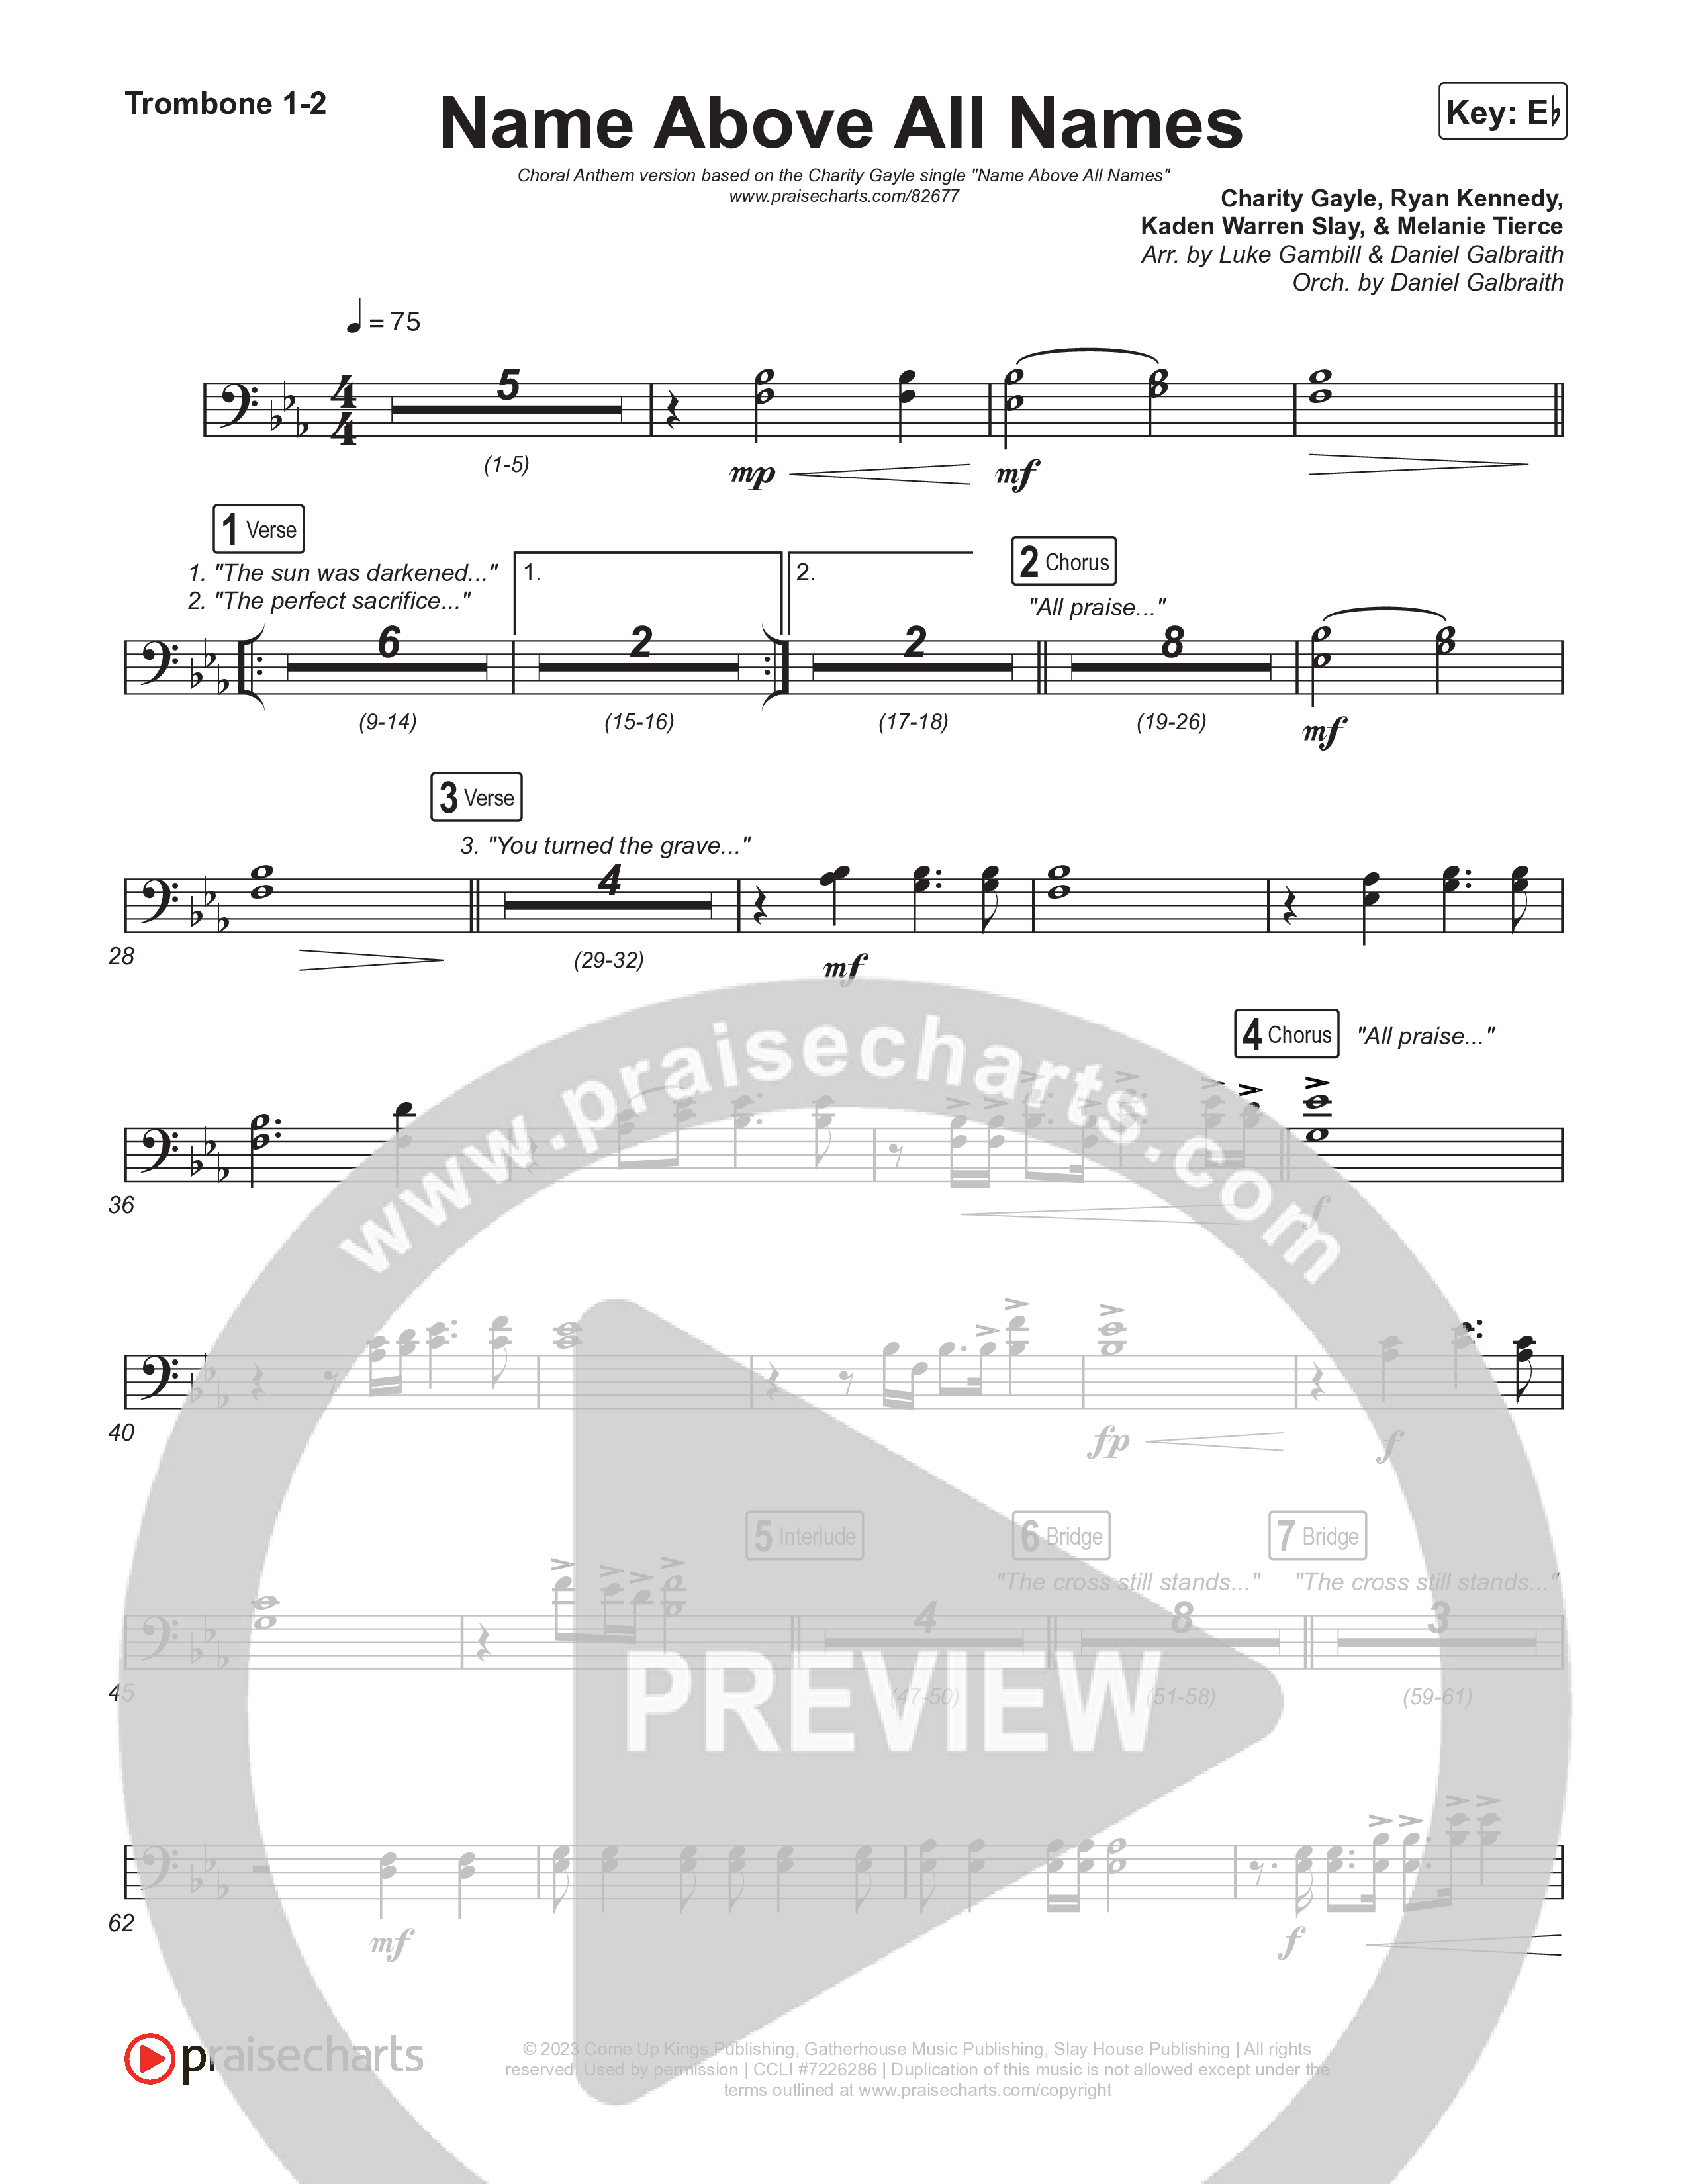 Name Above All Names (Choral Anthem SATB) Trombone 1/2 (Charity Gayle / Arr. Luke Gambill)